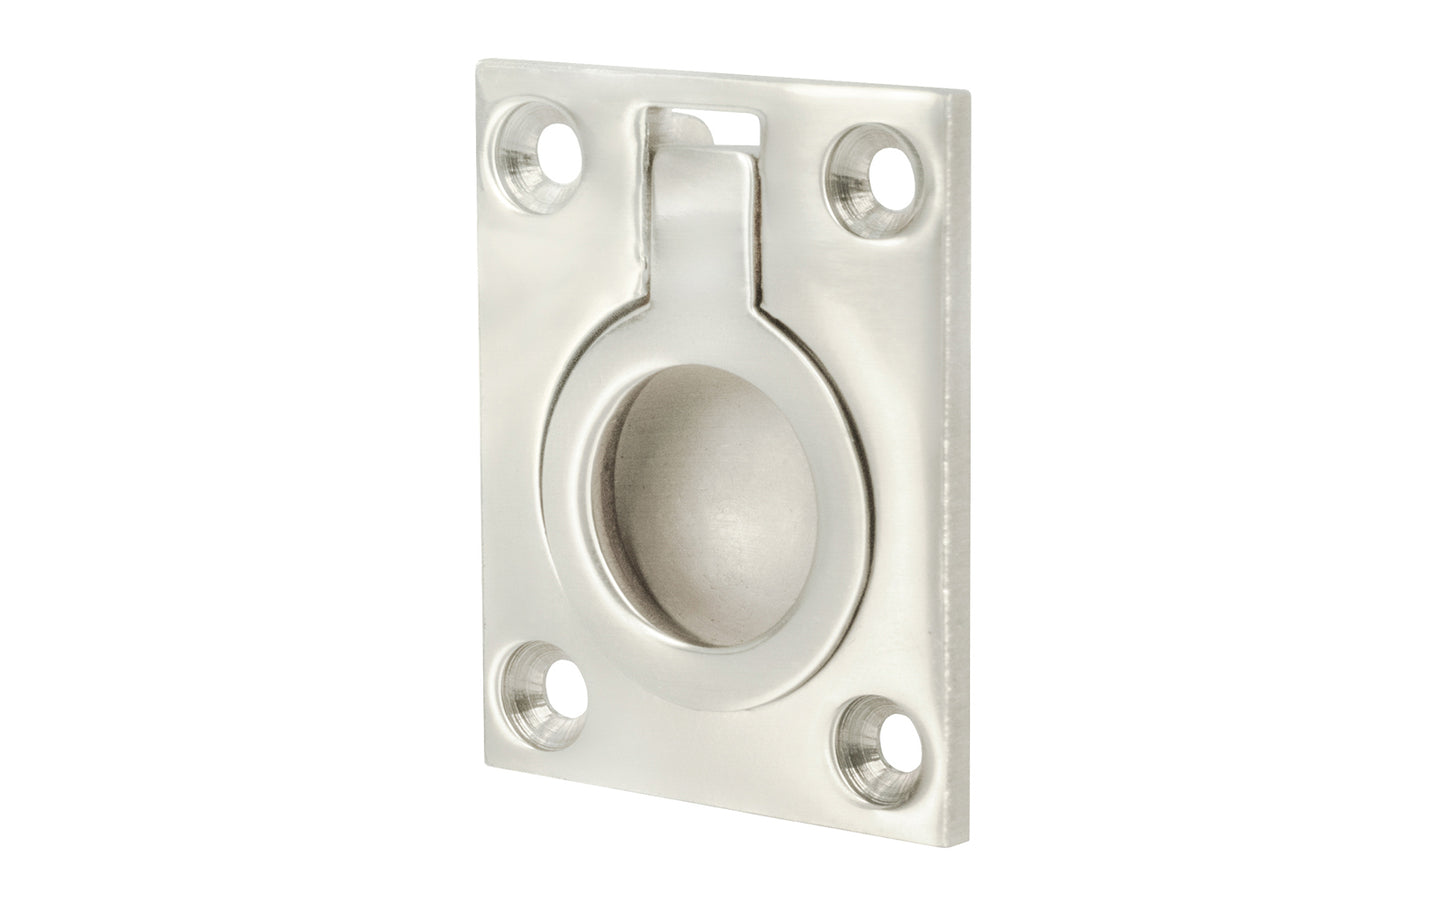 A classic & traditional flush mount recessed ring pull. High quality solid brass, this finger ring pull is thick & stout for durability. For sliding cabinet doors, trap doors, hatches, small boxes, etc. 1-3/4" high x 1-7/16" wide. Polished Nickel Finish